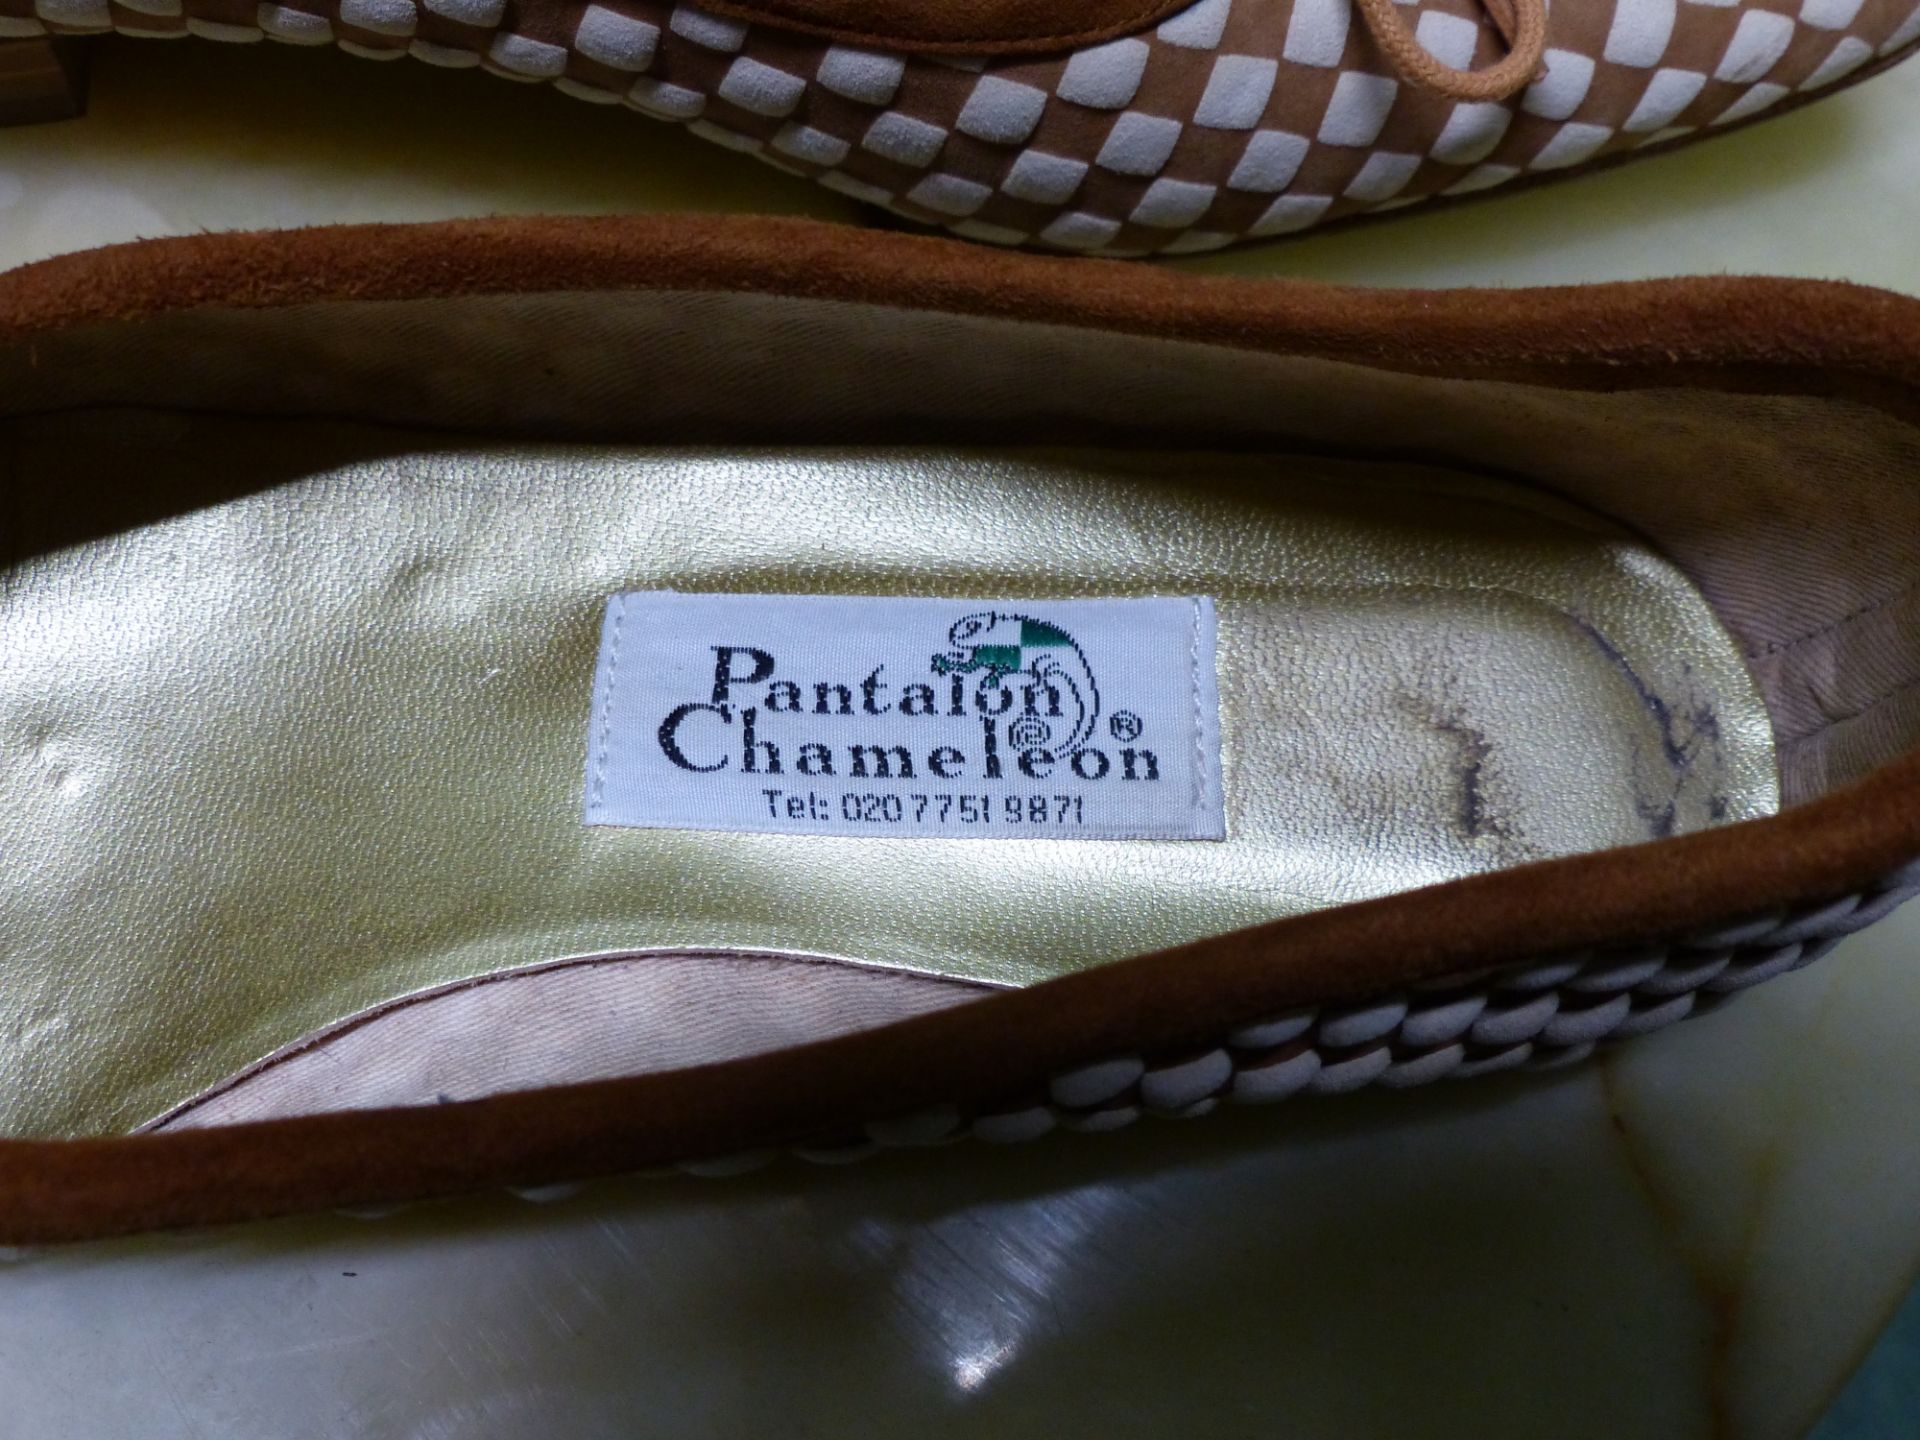 SHOES. TWO PAIRS PANTALON CHAMELEON FRENCH SIZE EUR 40 TAN AND BEIGE SUEDE SLIP ON'S, AND CREAM - Image 3 of 9